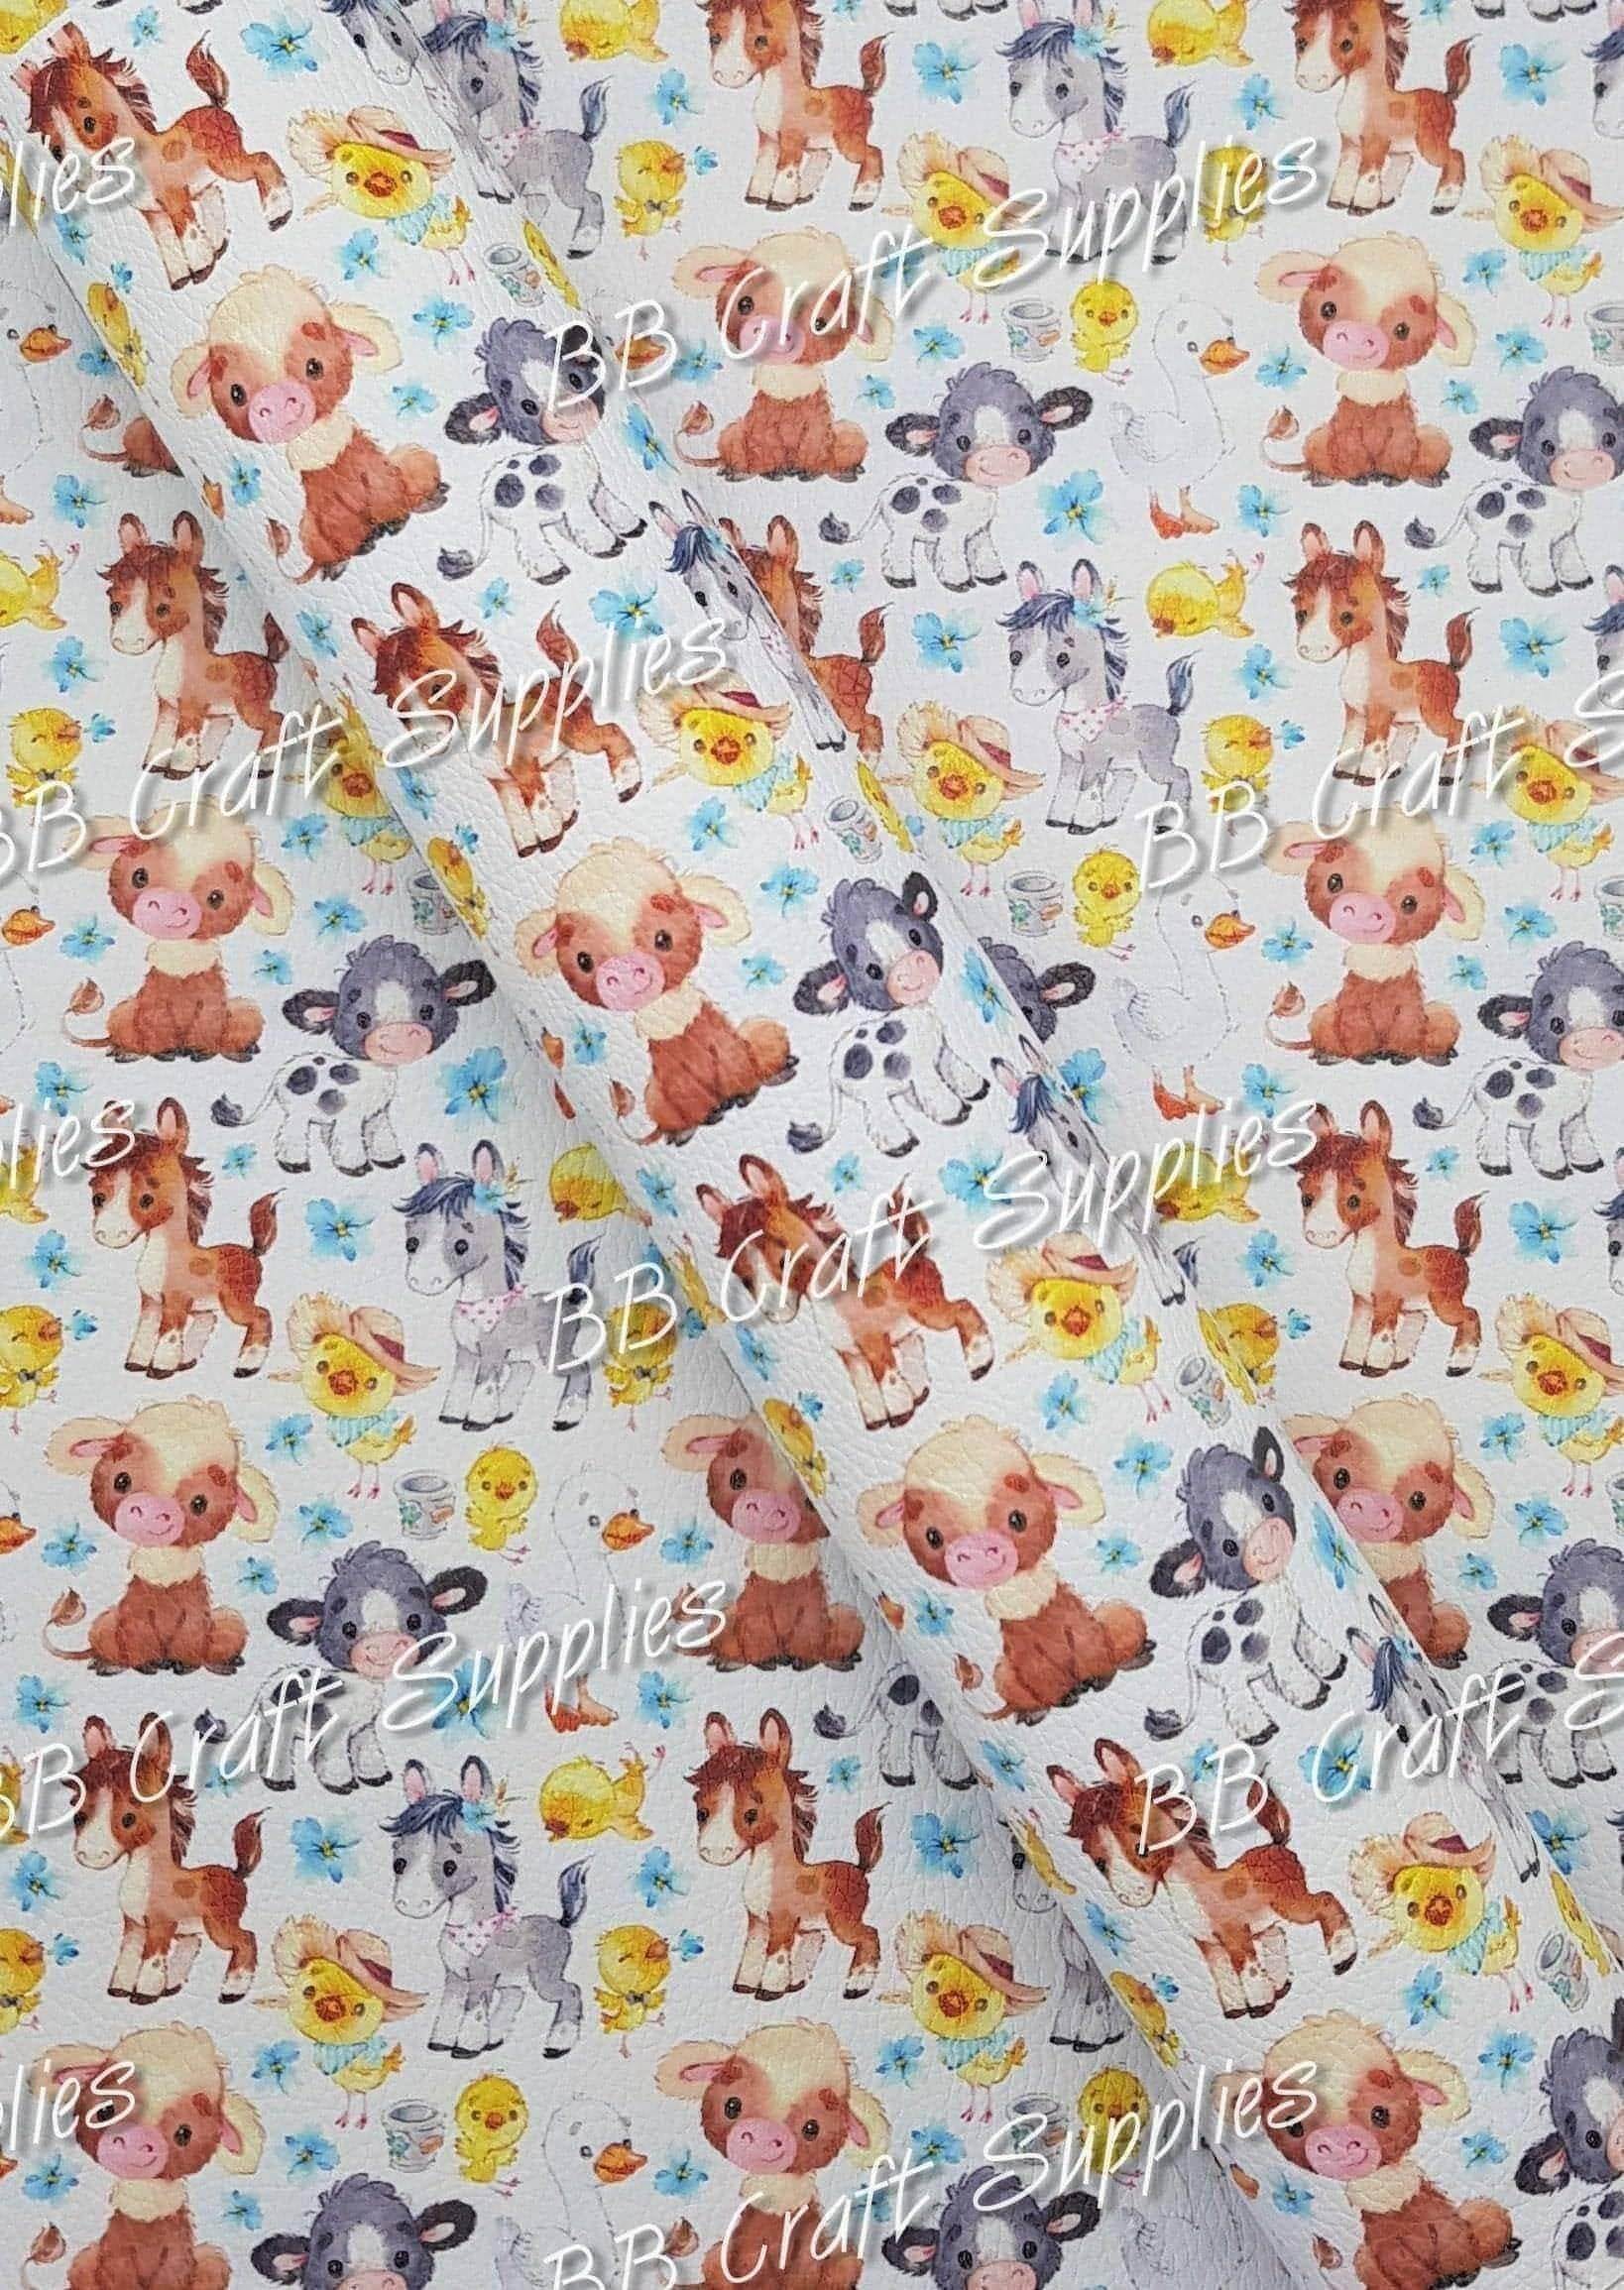 Baby Farm Animals - Animal, Australia Day, Australian, country, Farm, Faux, Faux Leather, Hourse, lamb, Leather, leatherette, pig, sheep - Bare Butler Faux Leather Supplies 